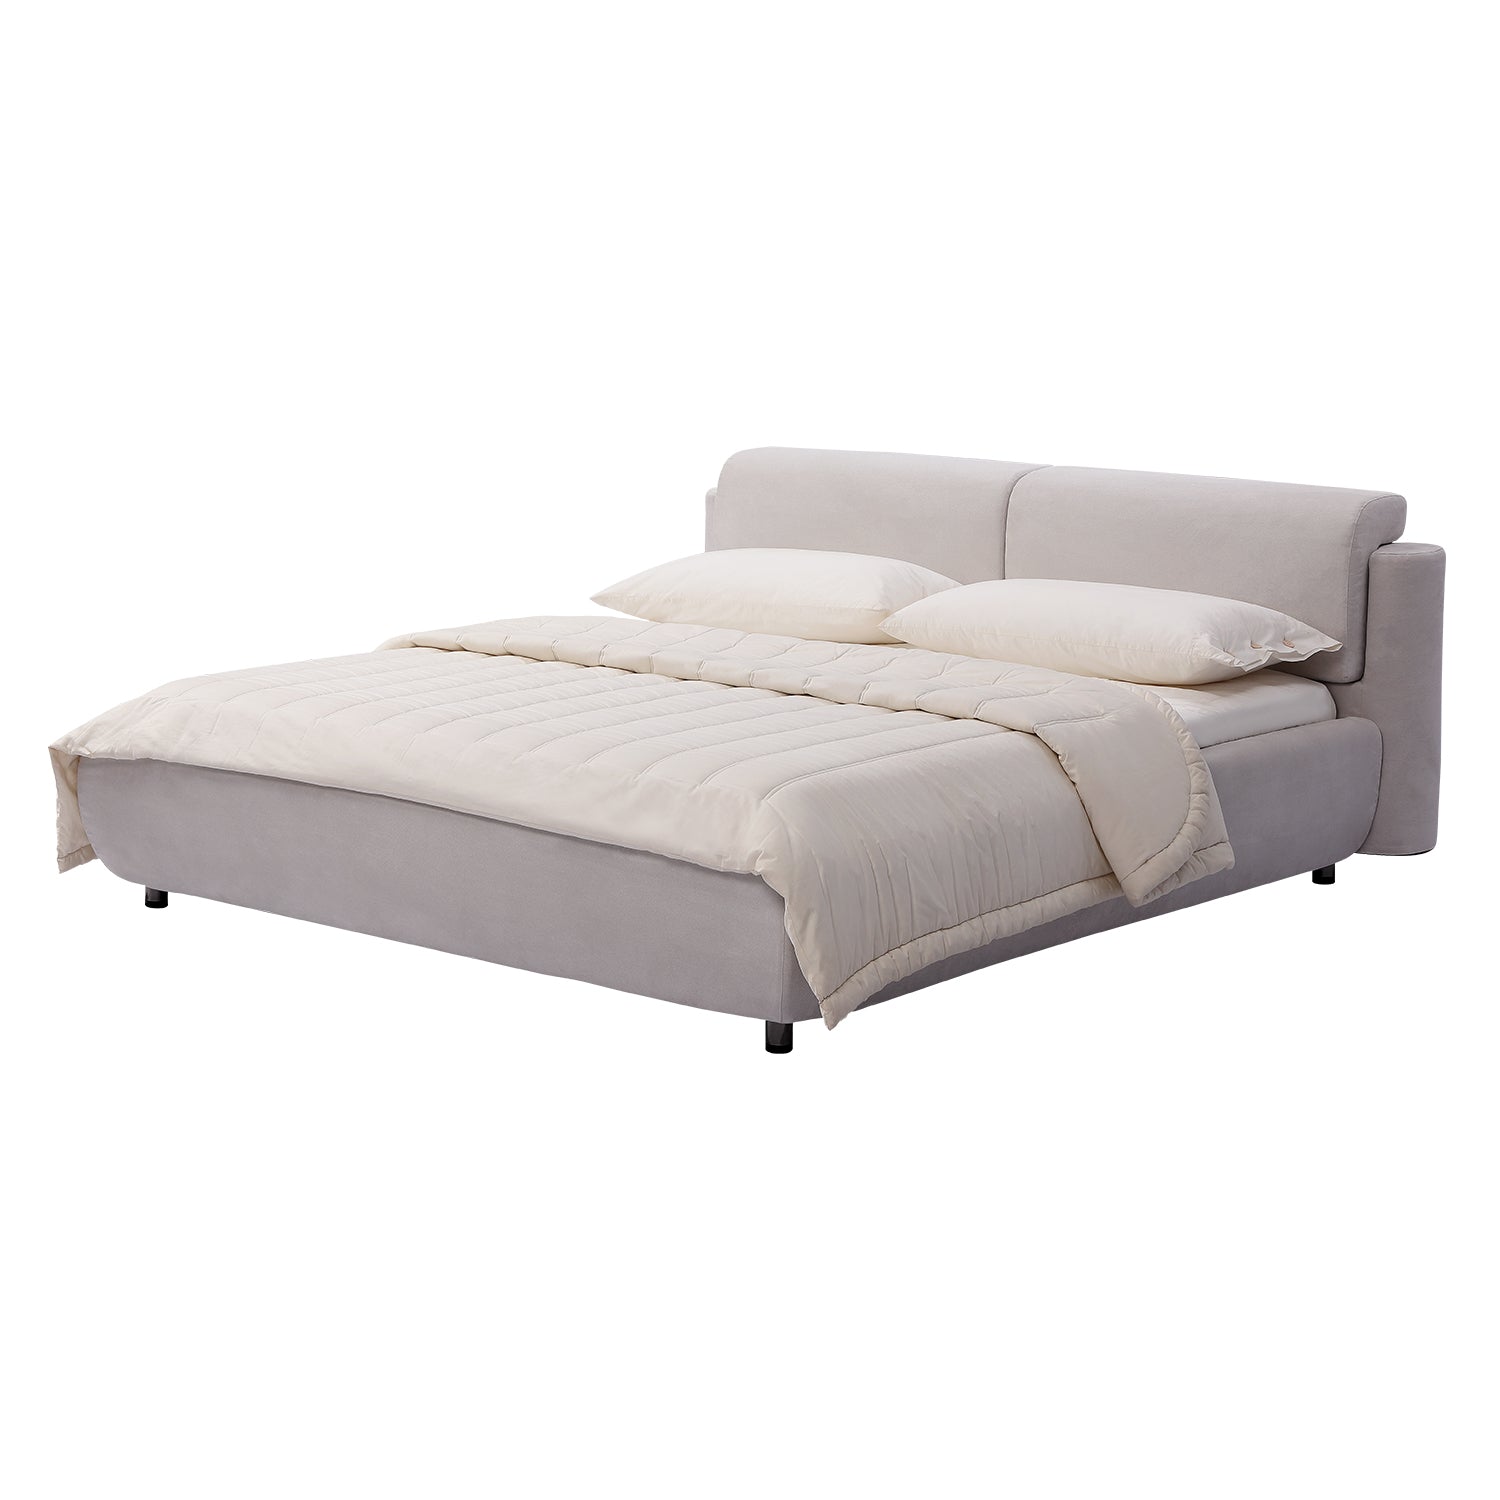 Modern minimalist bed frame BZZ4 - 082 with beige upholstered base, cushioned headboard, and beige bedding by DeRUCCI.